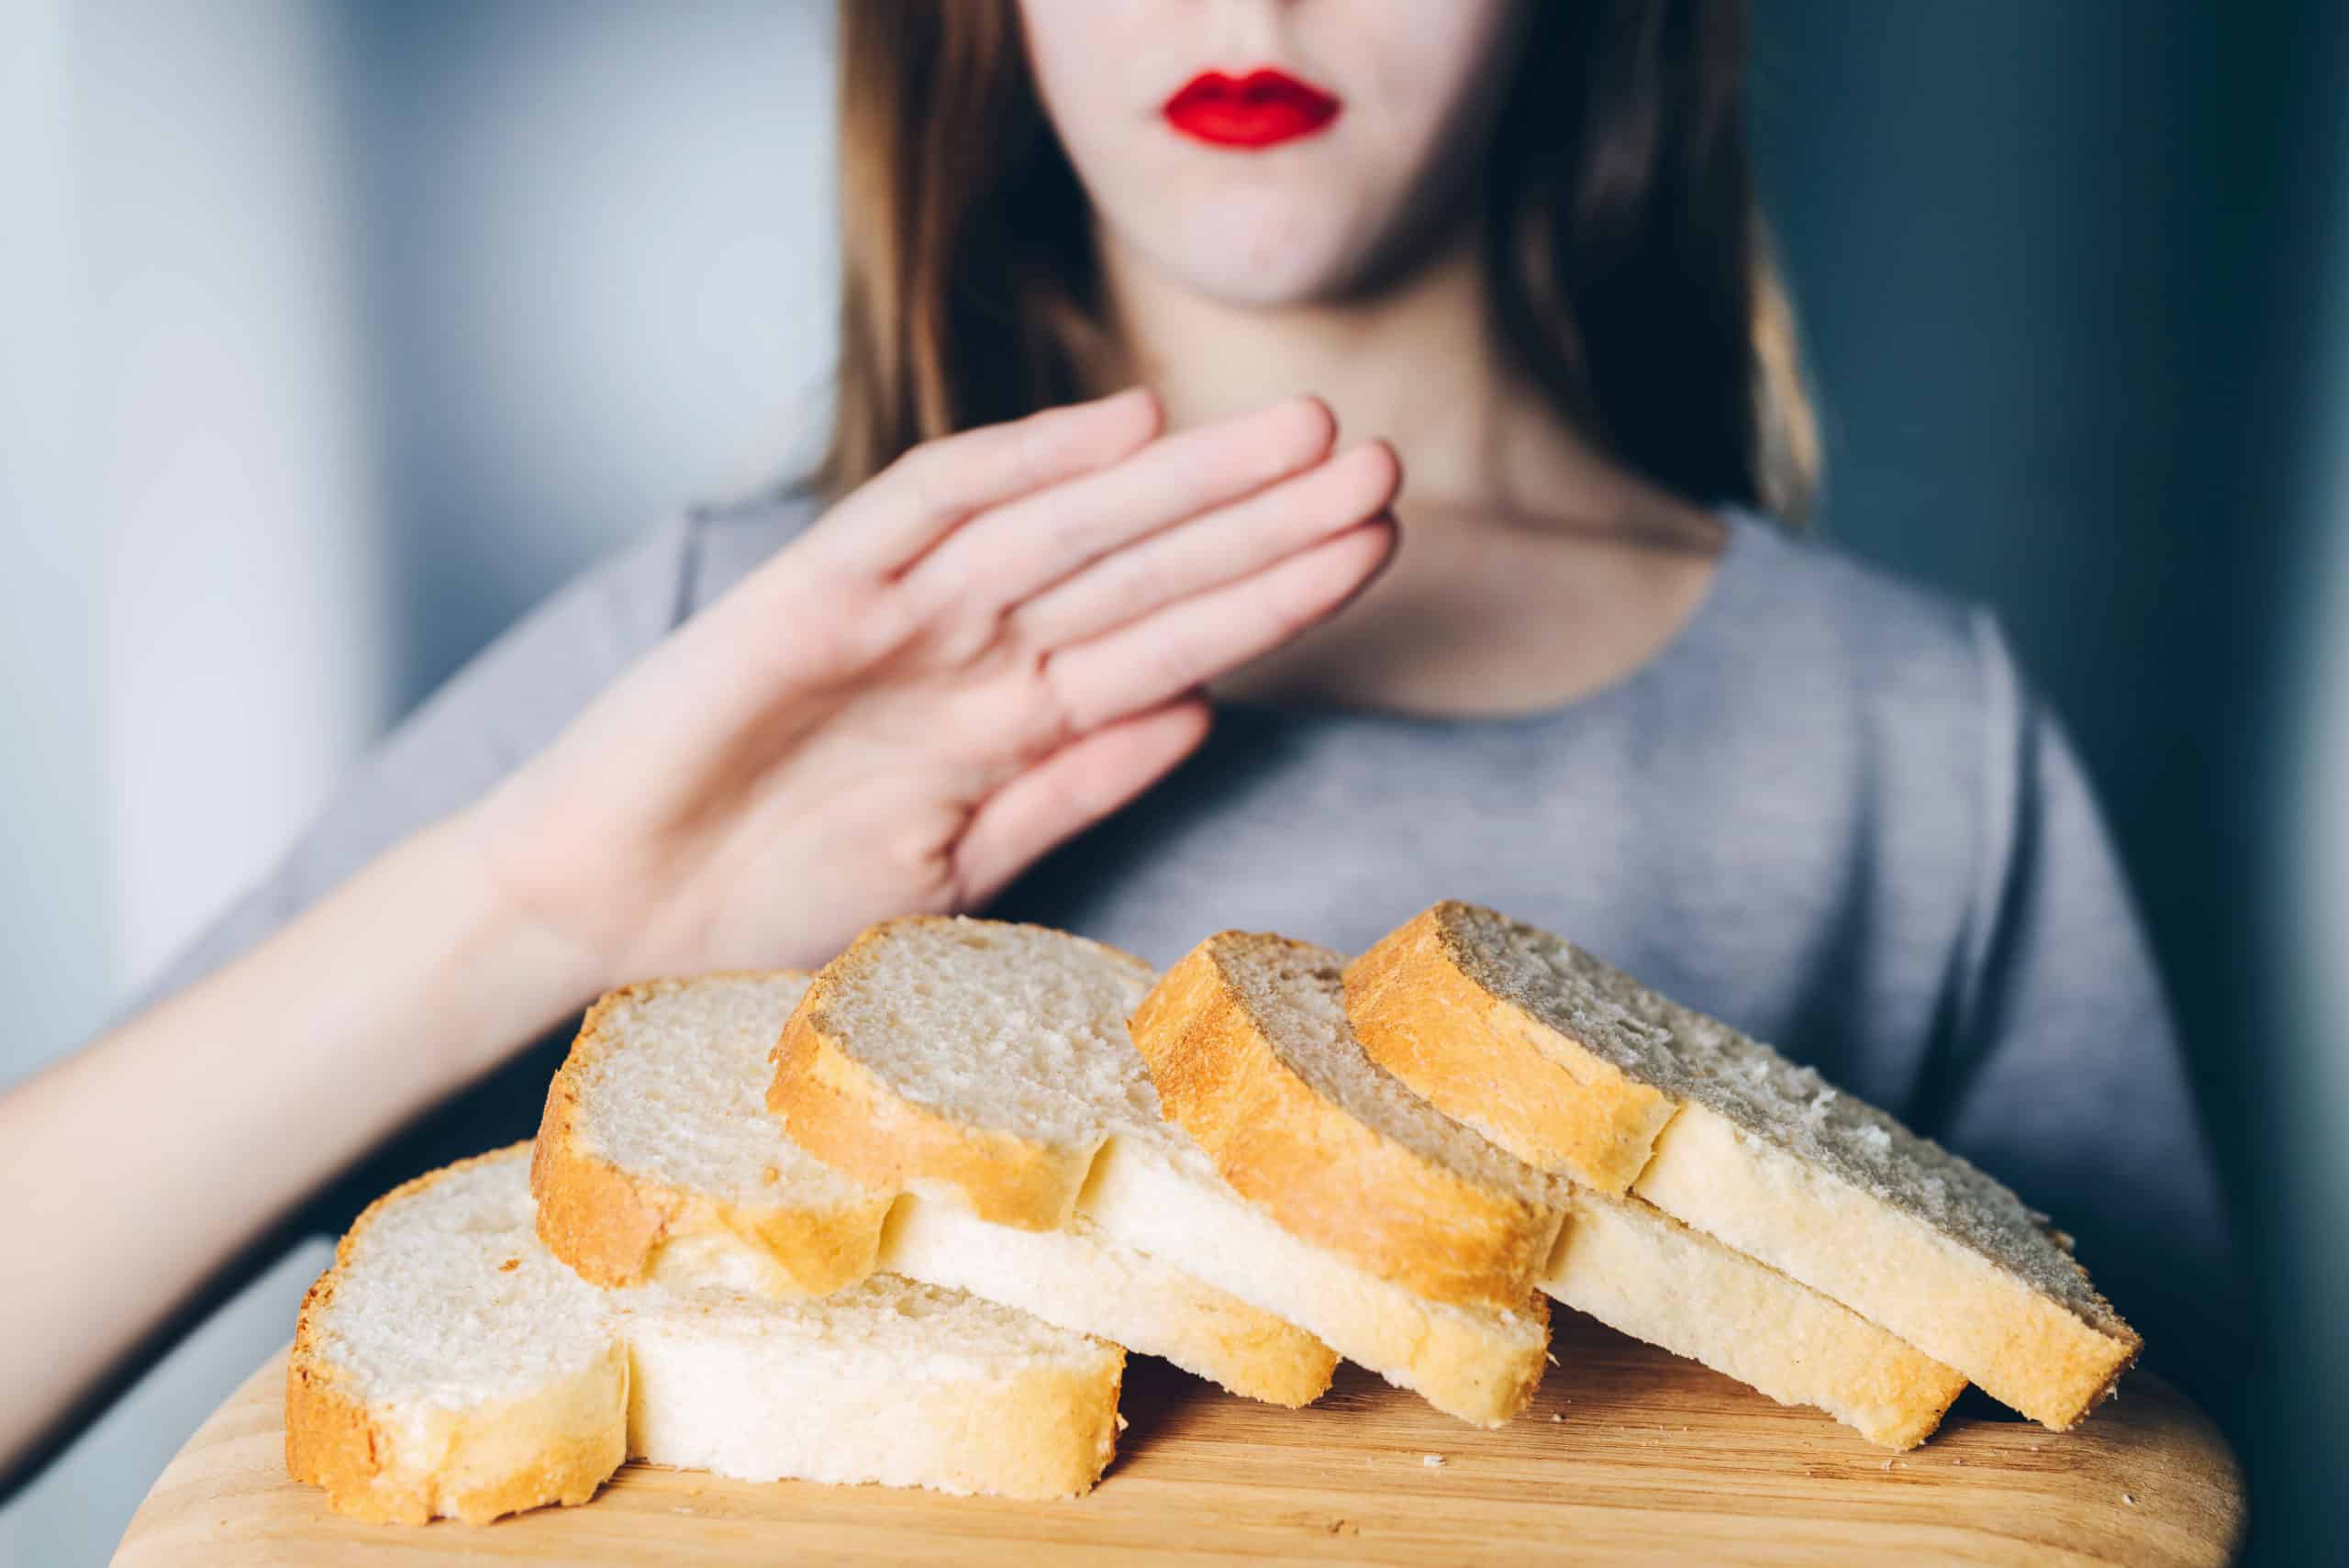 Gluten intolerance and diet concept. Young girl refuses to eat white bread